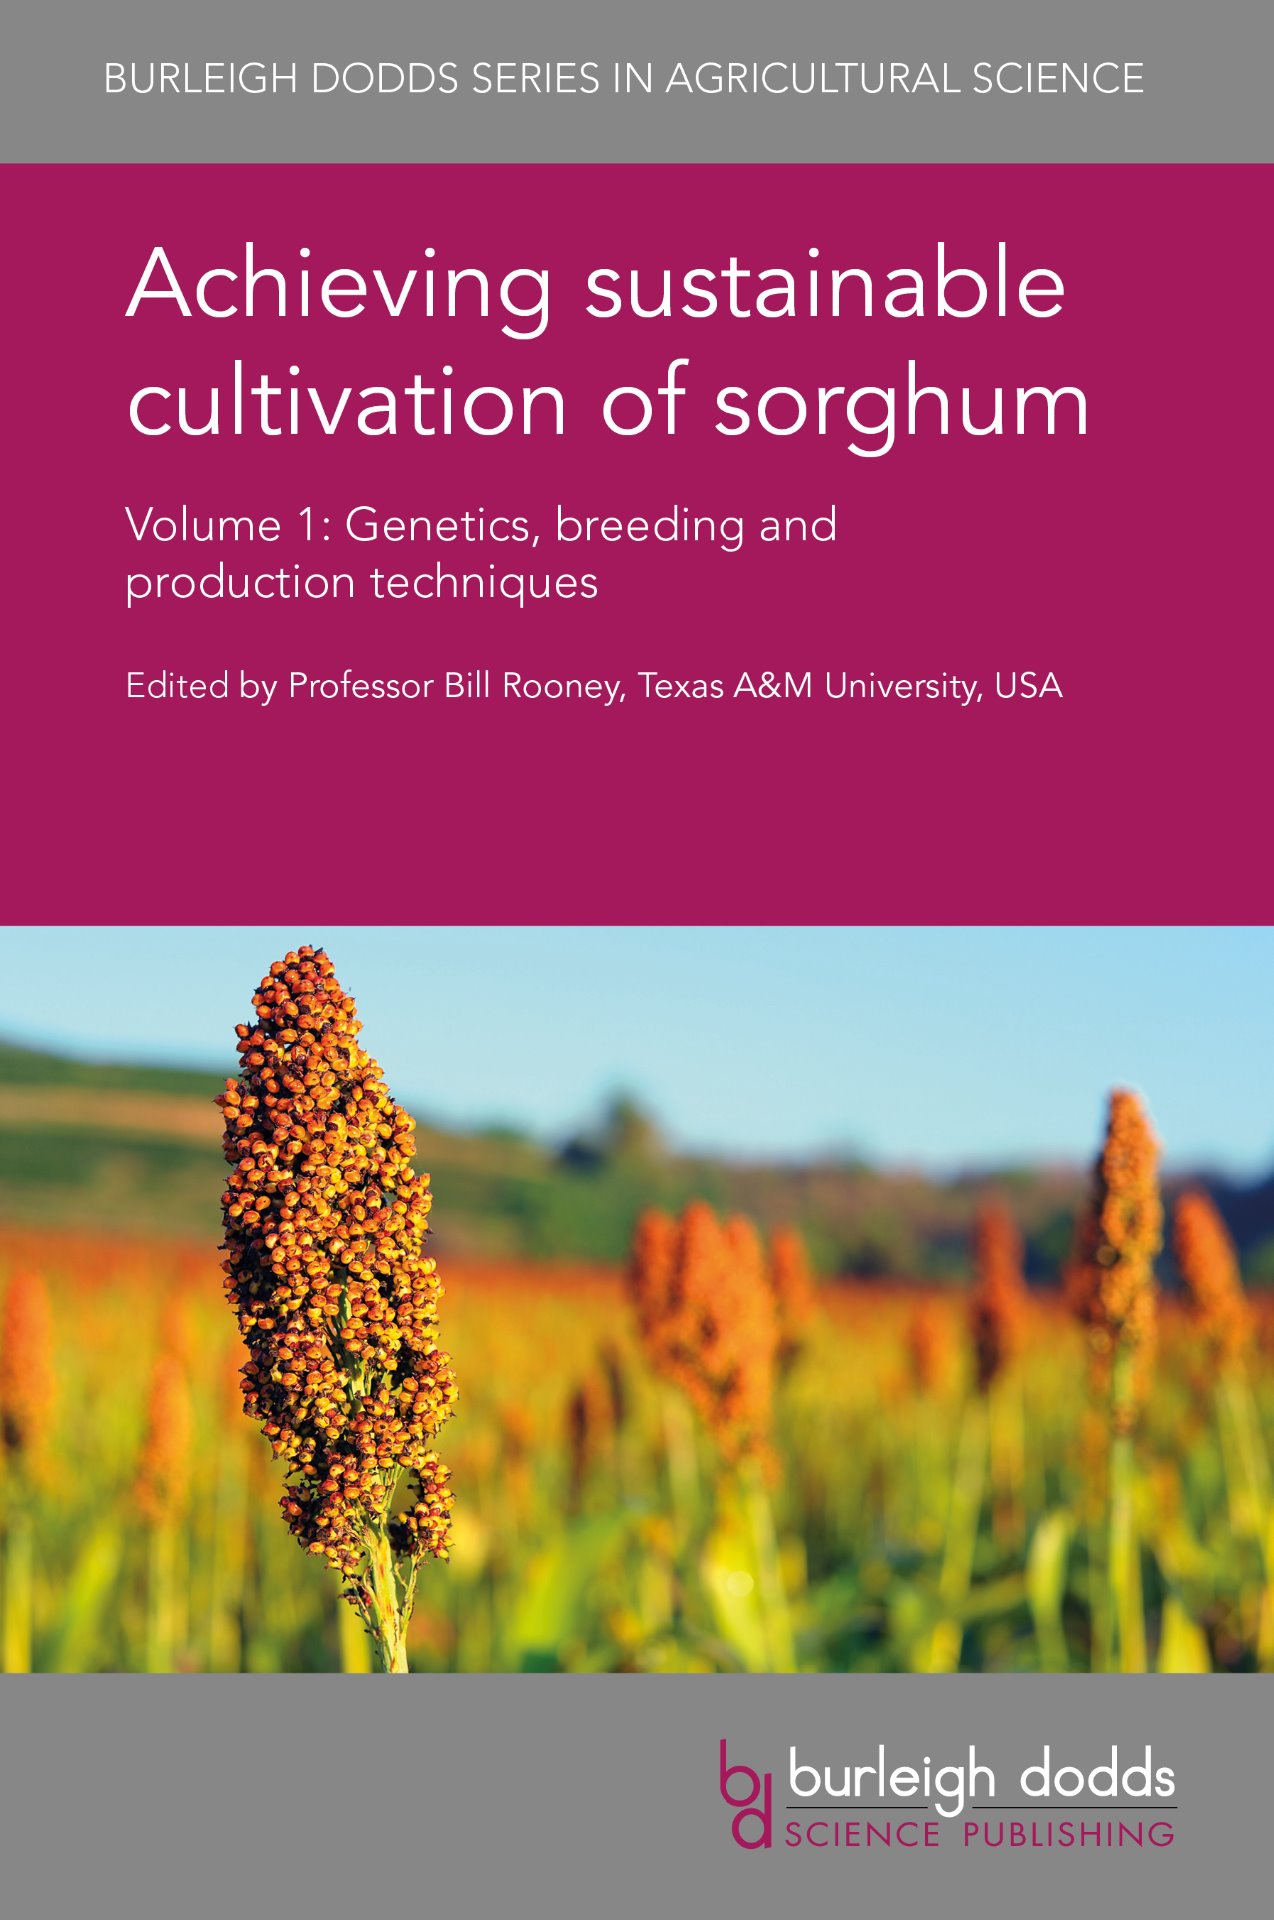 Achieving sustainable cultivation of sorghum - Volume 1 Cover